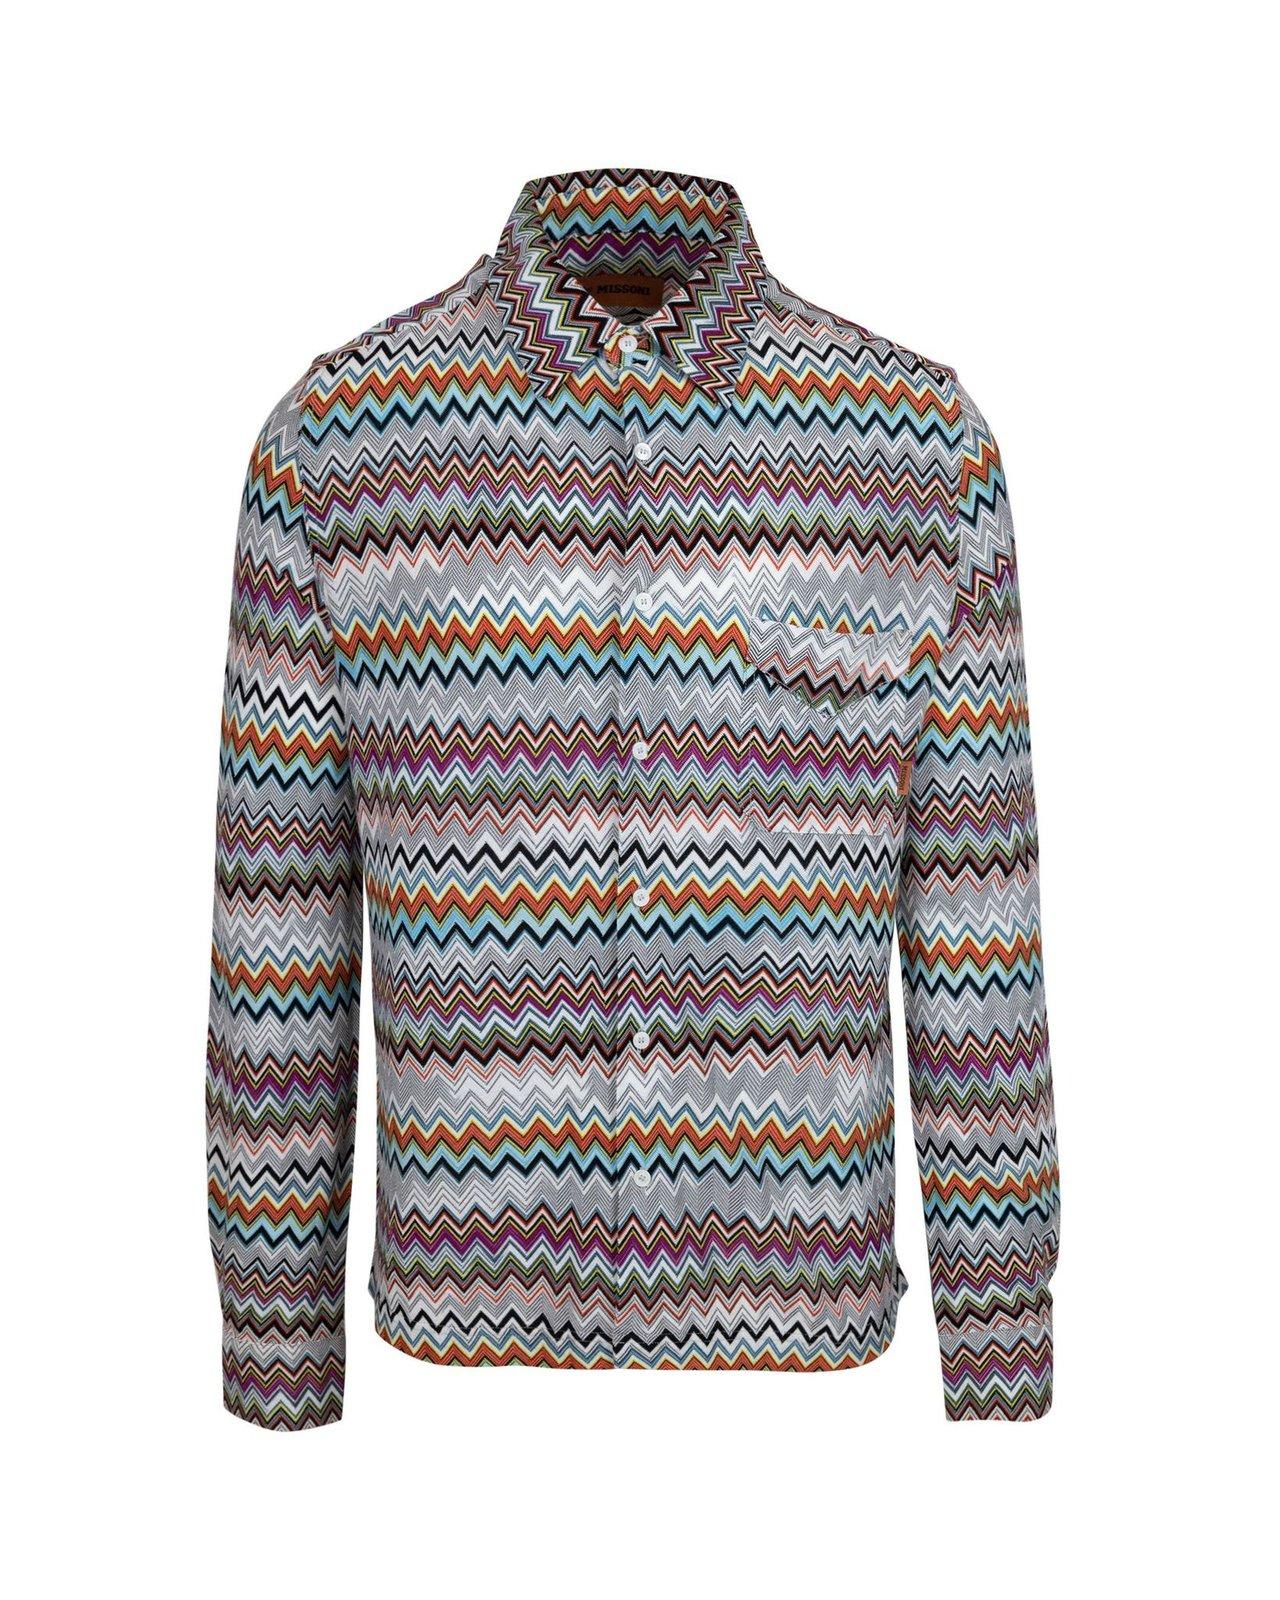 Missoni Zigzag Long-sleeved Buttoned Shirt